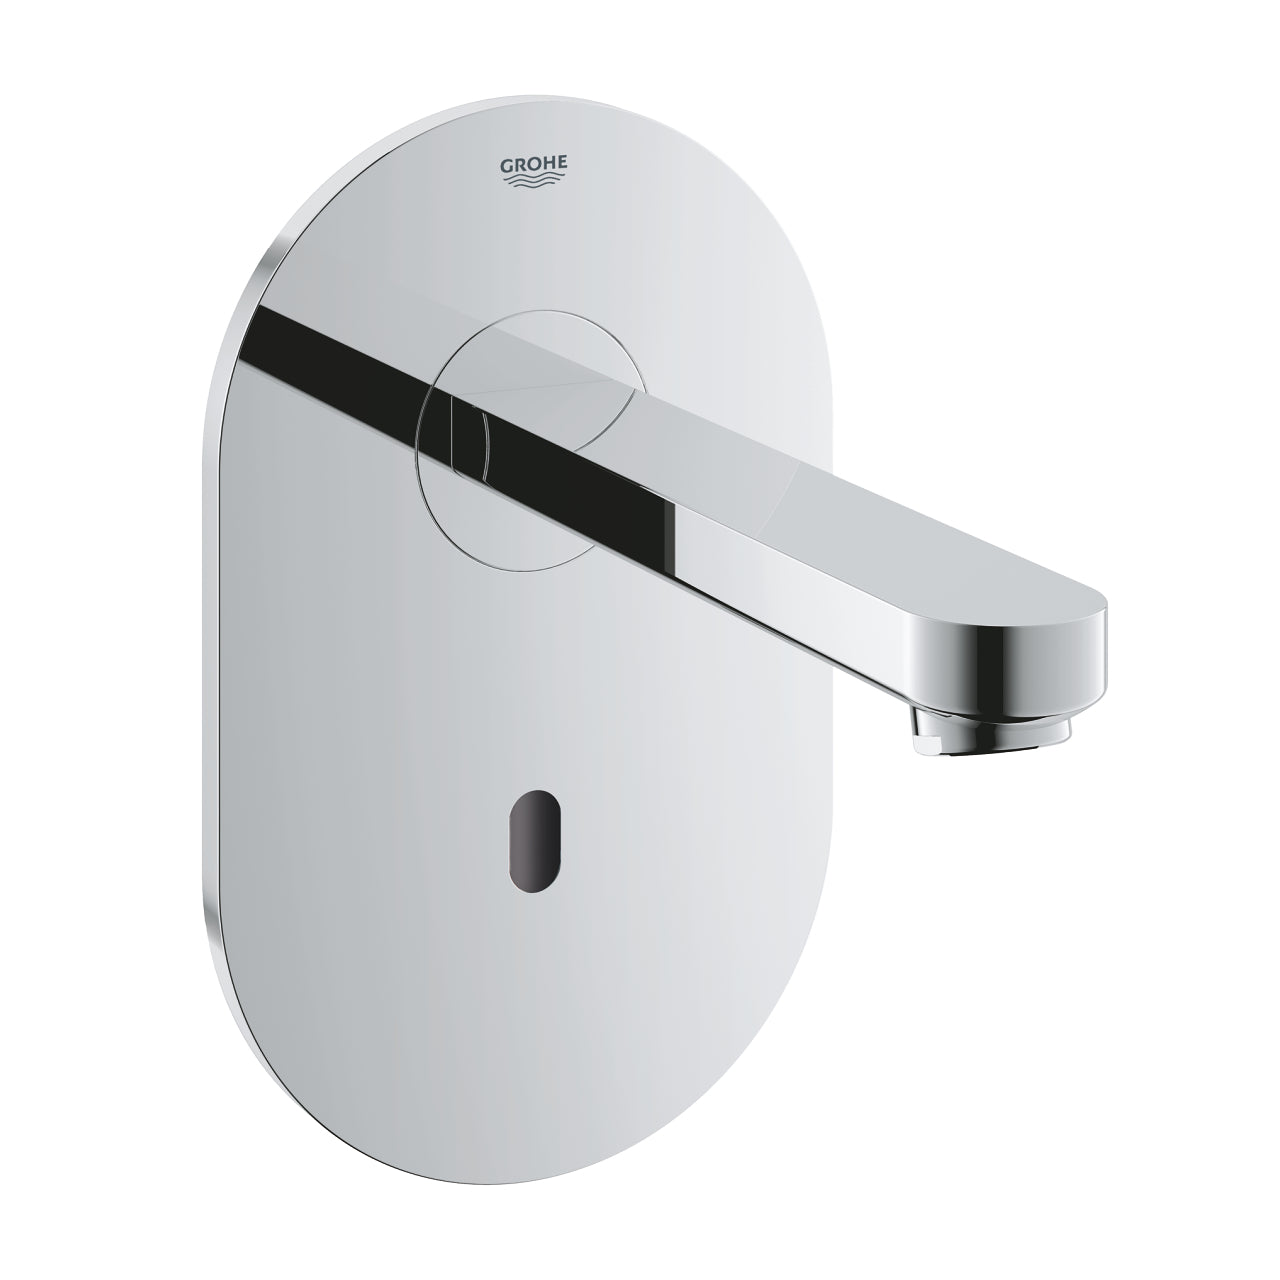 Grohe Euroeco Cosmopolitan E Infra Red Electronic Wall Basin Tap